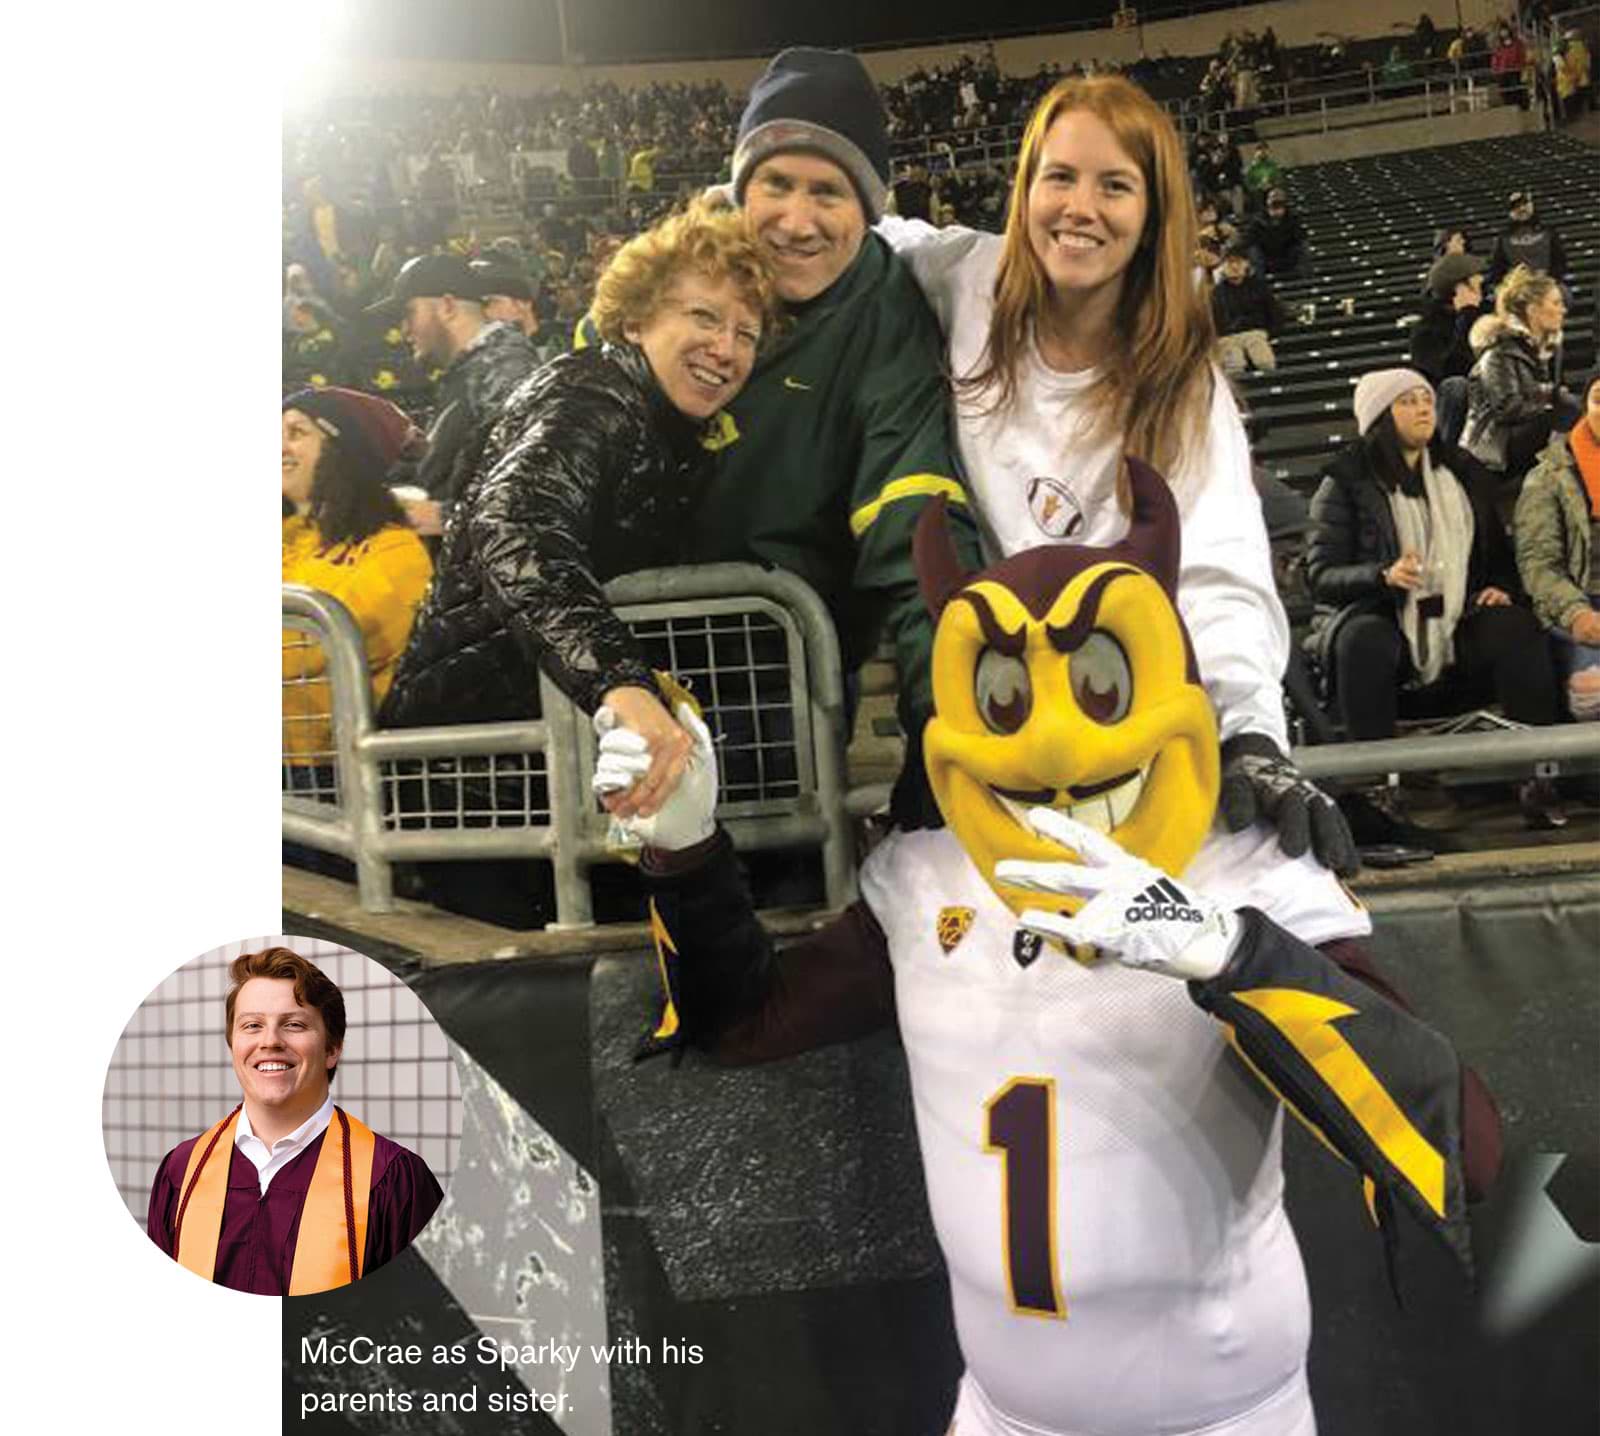 McCraw as Sparky with his parents and sister